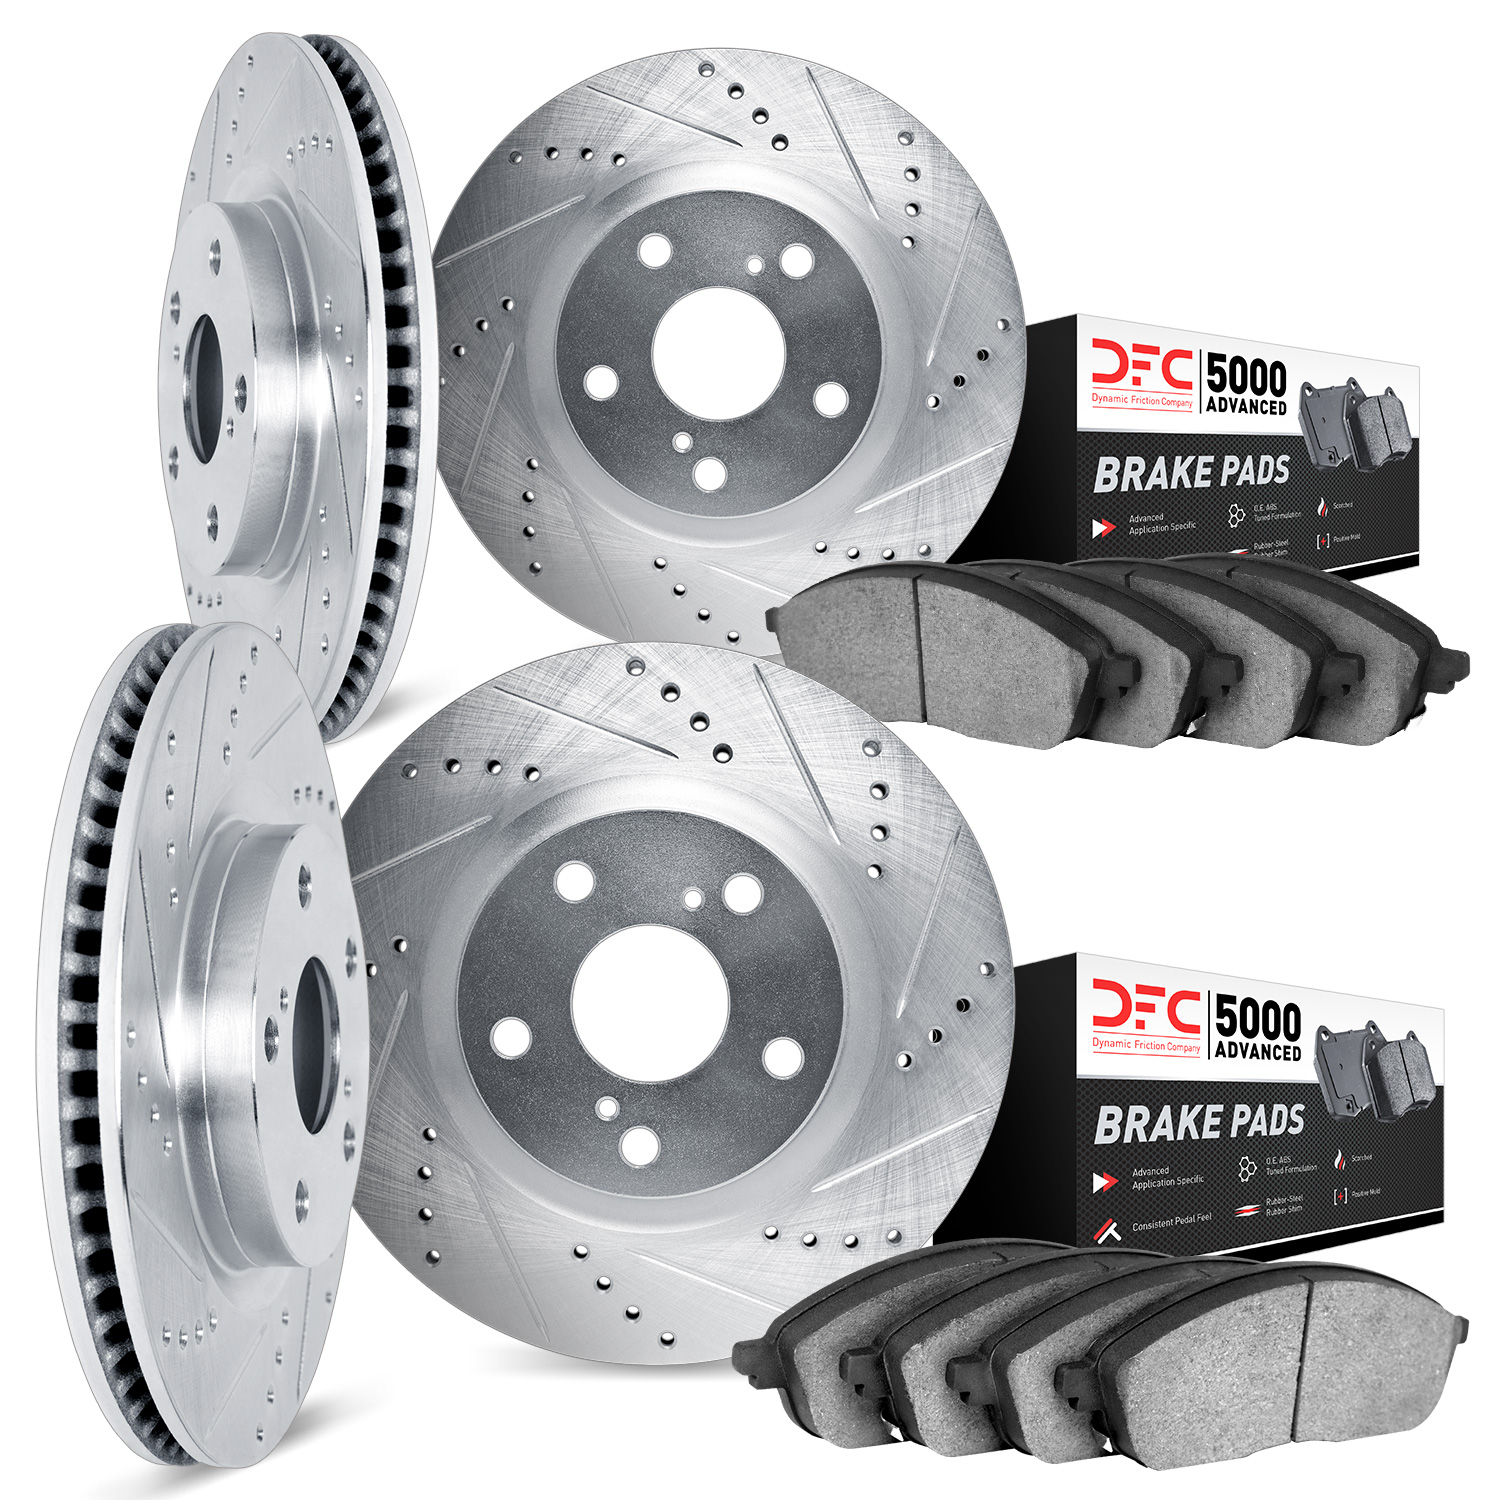 7504-31060 Drilled/Slotted Brake Rotors w/5000 Advanced Brake Pads Kit [Silver], 2004-2006 BMW, Position: Front and Rear